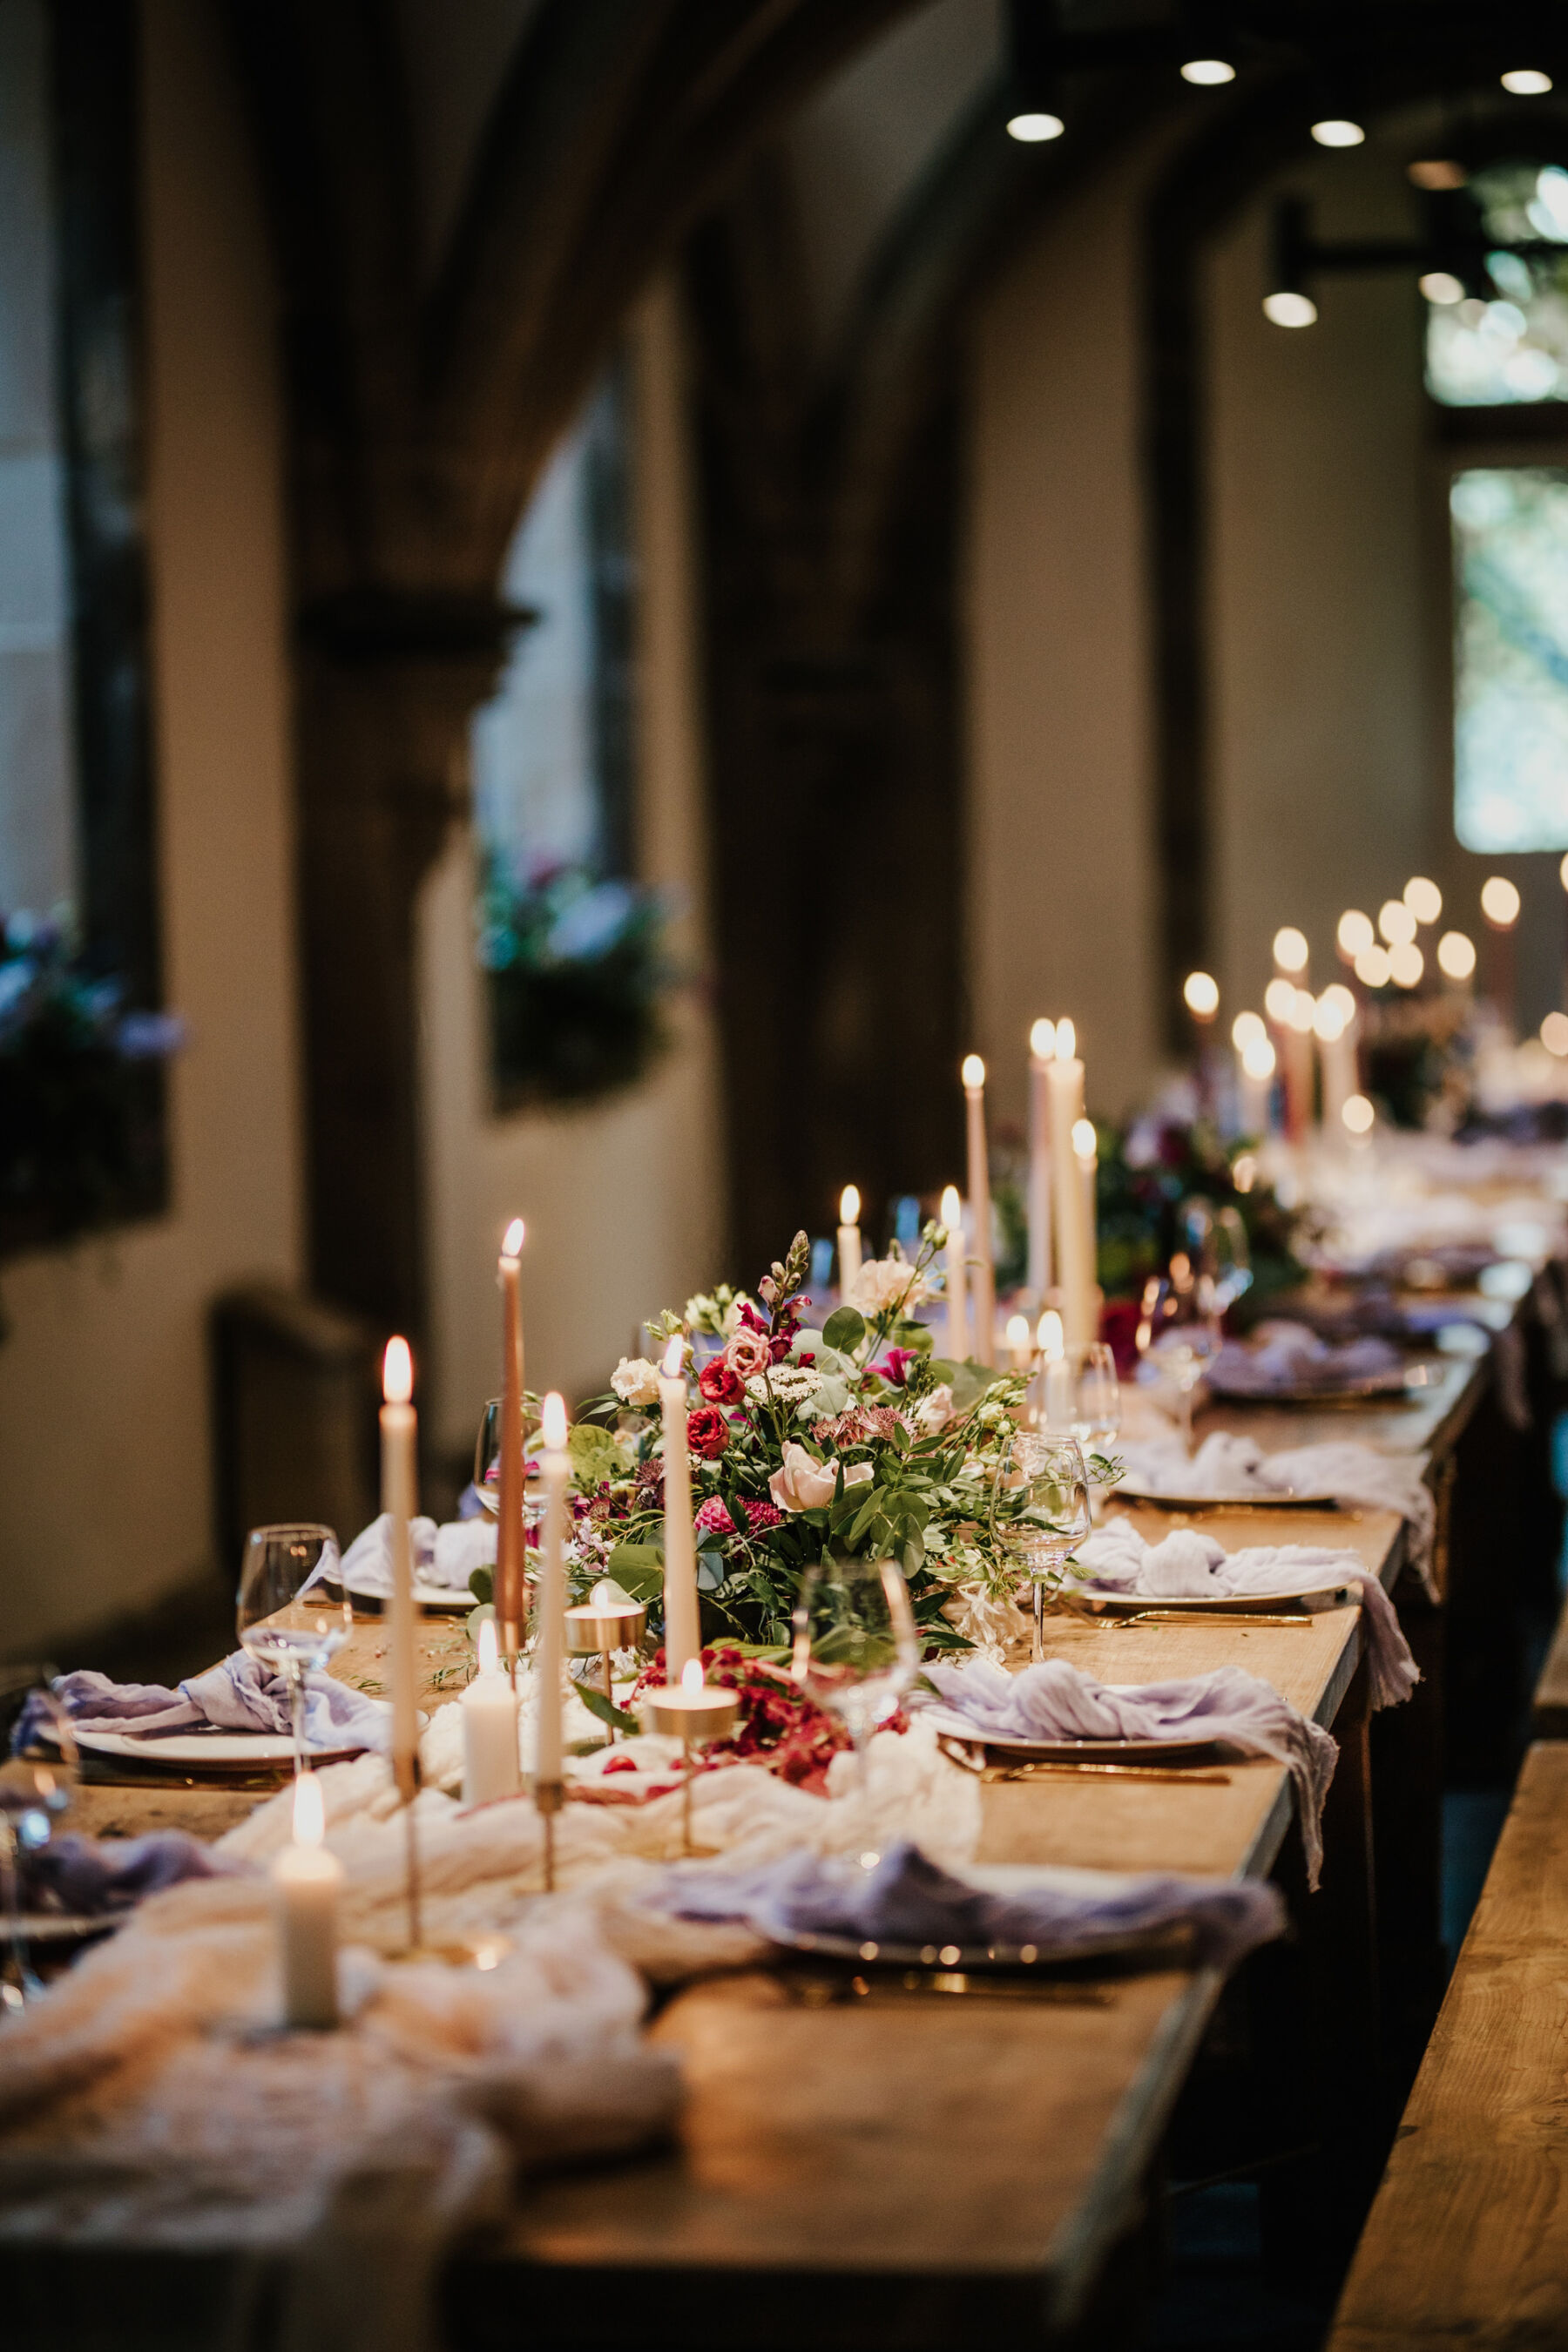 Romantic candlelit table with taper candles and linens at Bishop's Palace historic wedding venue in Wells, Somerset.